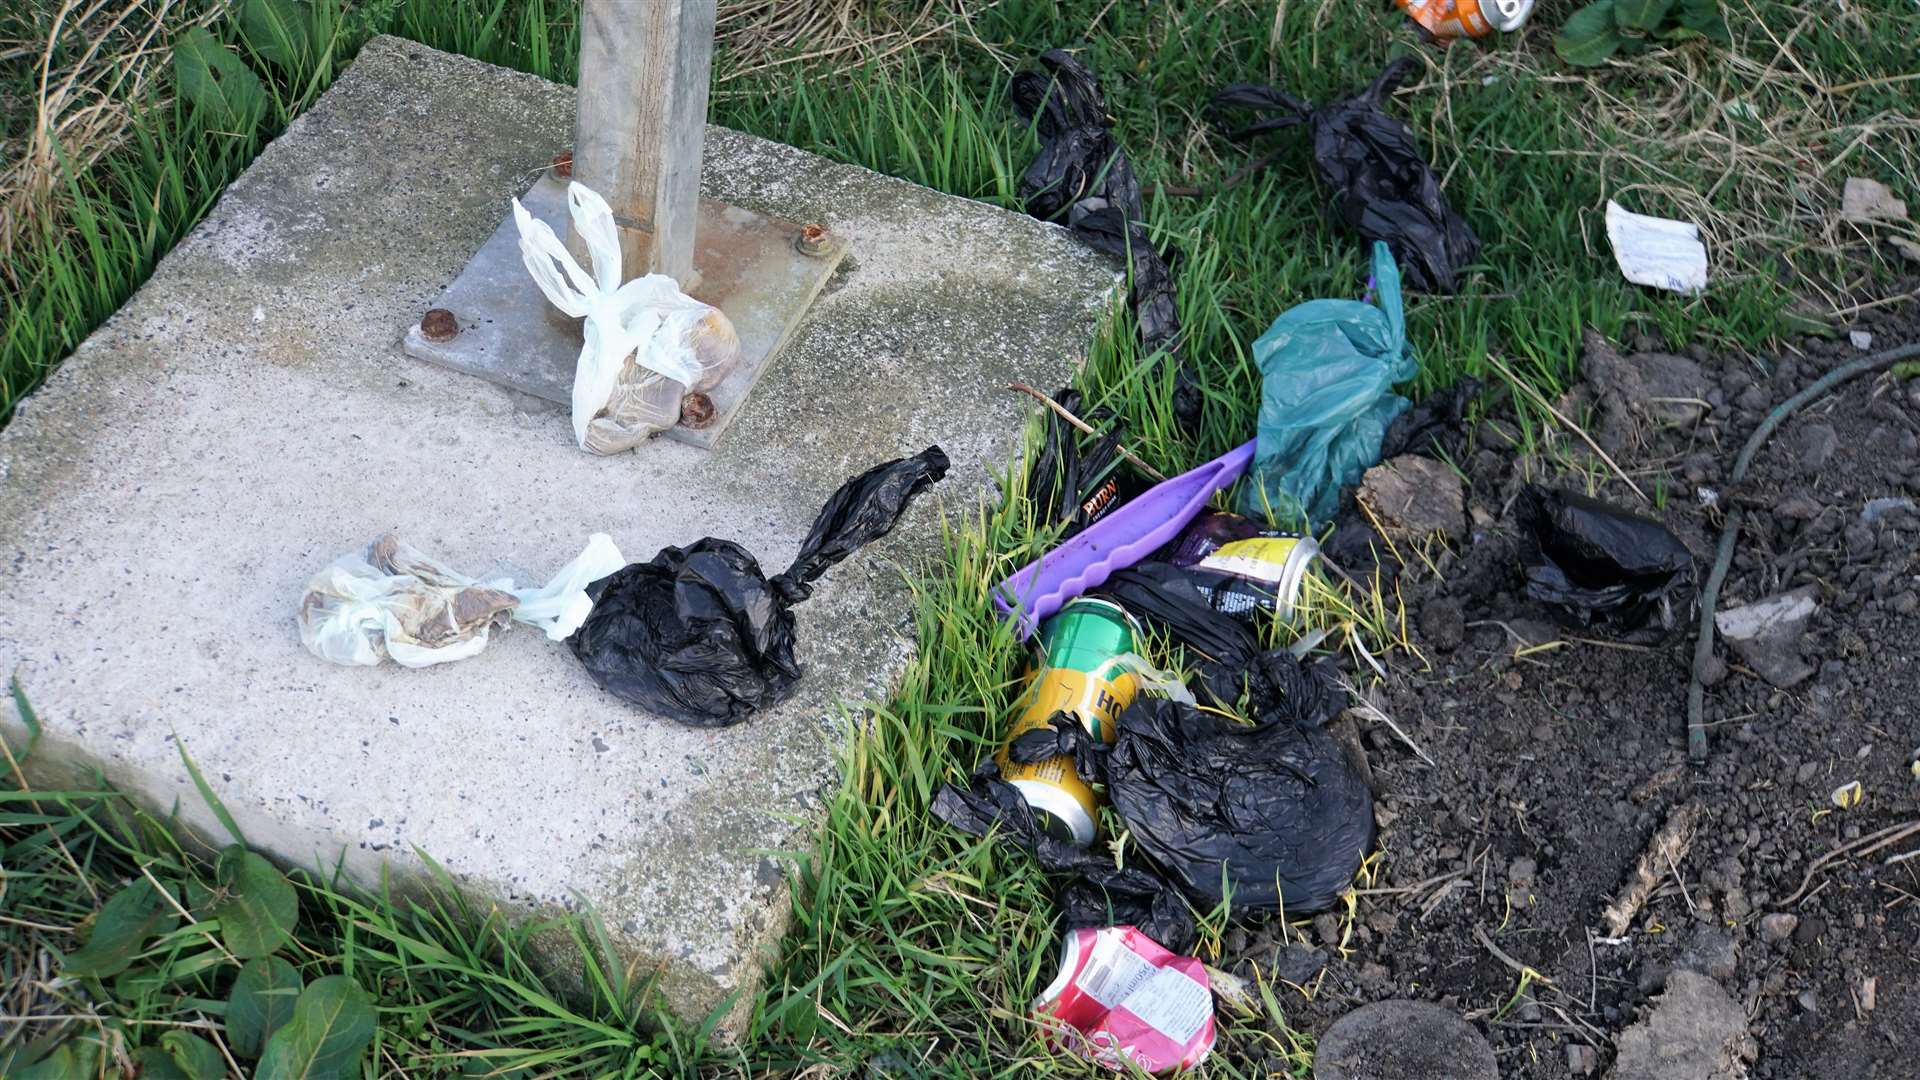 More than 10 bags were left beside this vandalised bin near the Trinkie at Wick. Picture: DGS